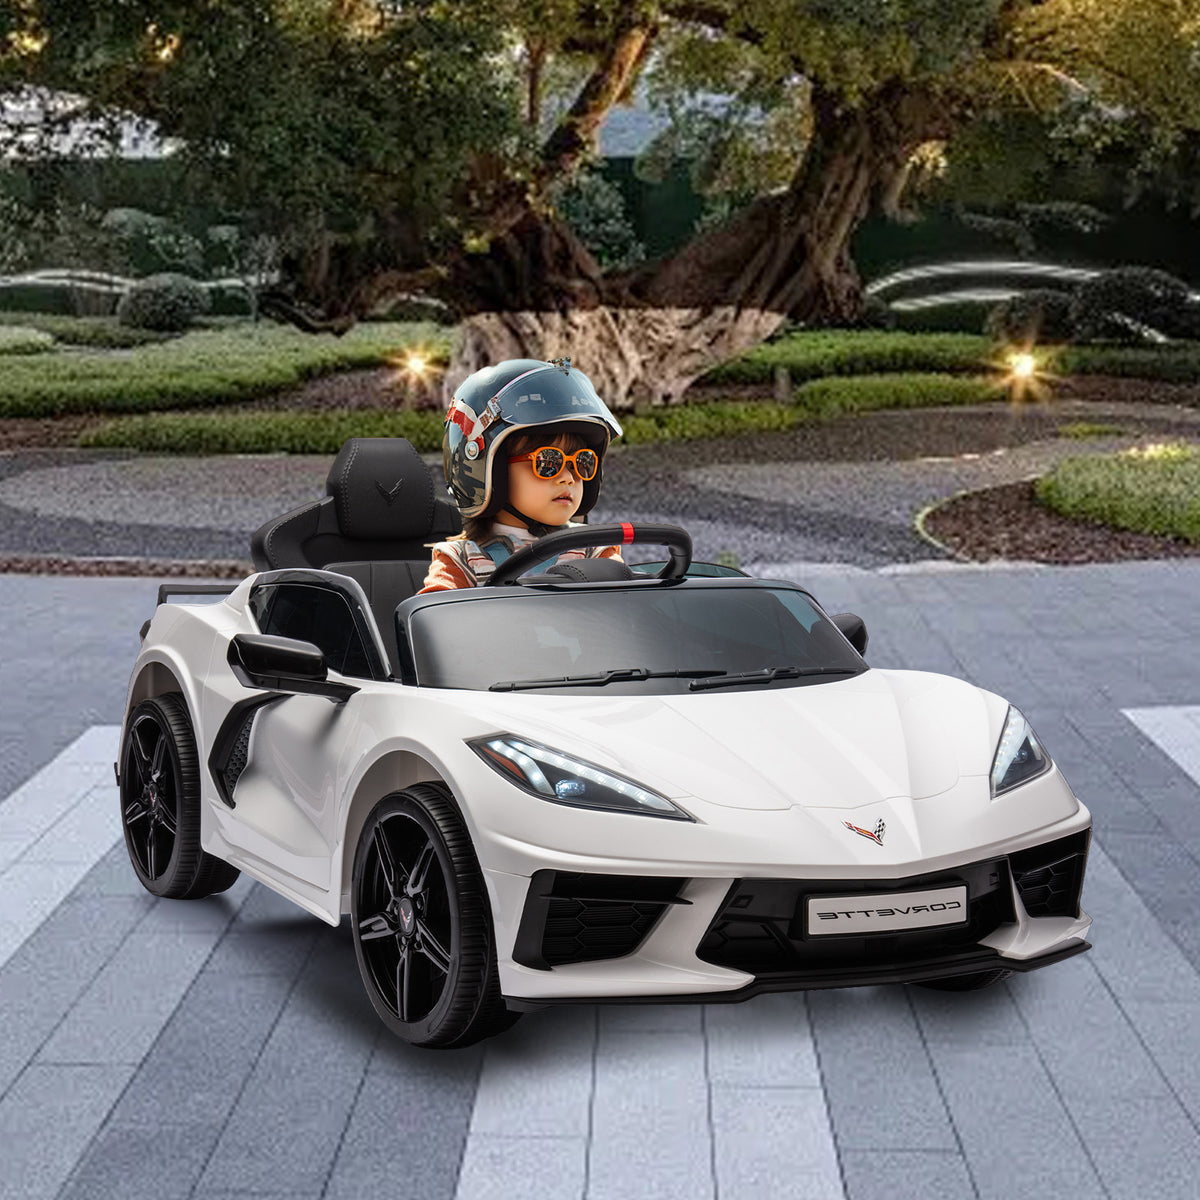 XJD Corvette C8 12V Electric Ride-On Car for Kids - Dual Speed, LED, USB, Bluetooth, Parental Control, for Ages 3+, White